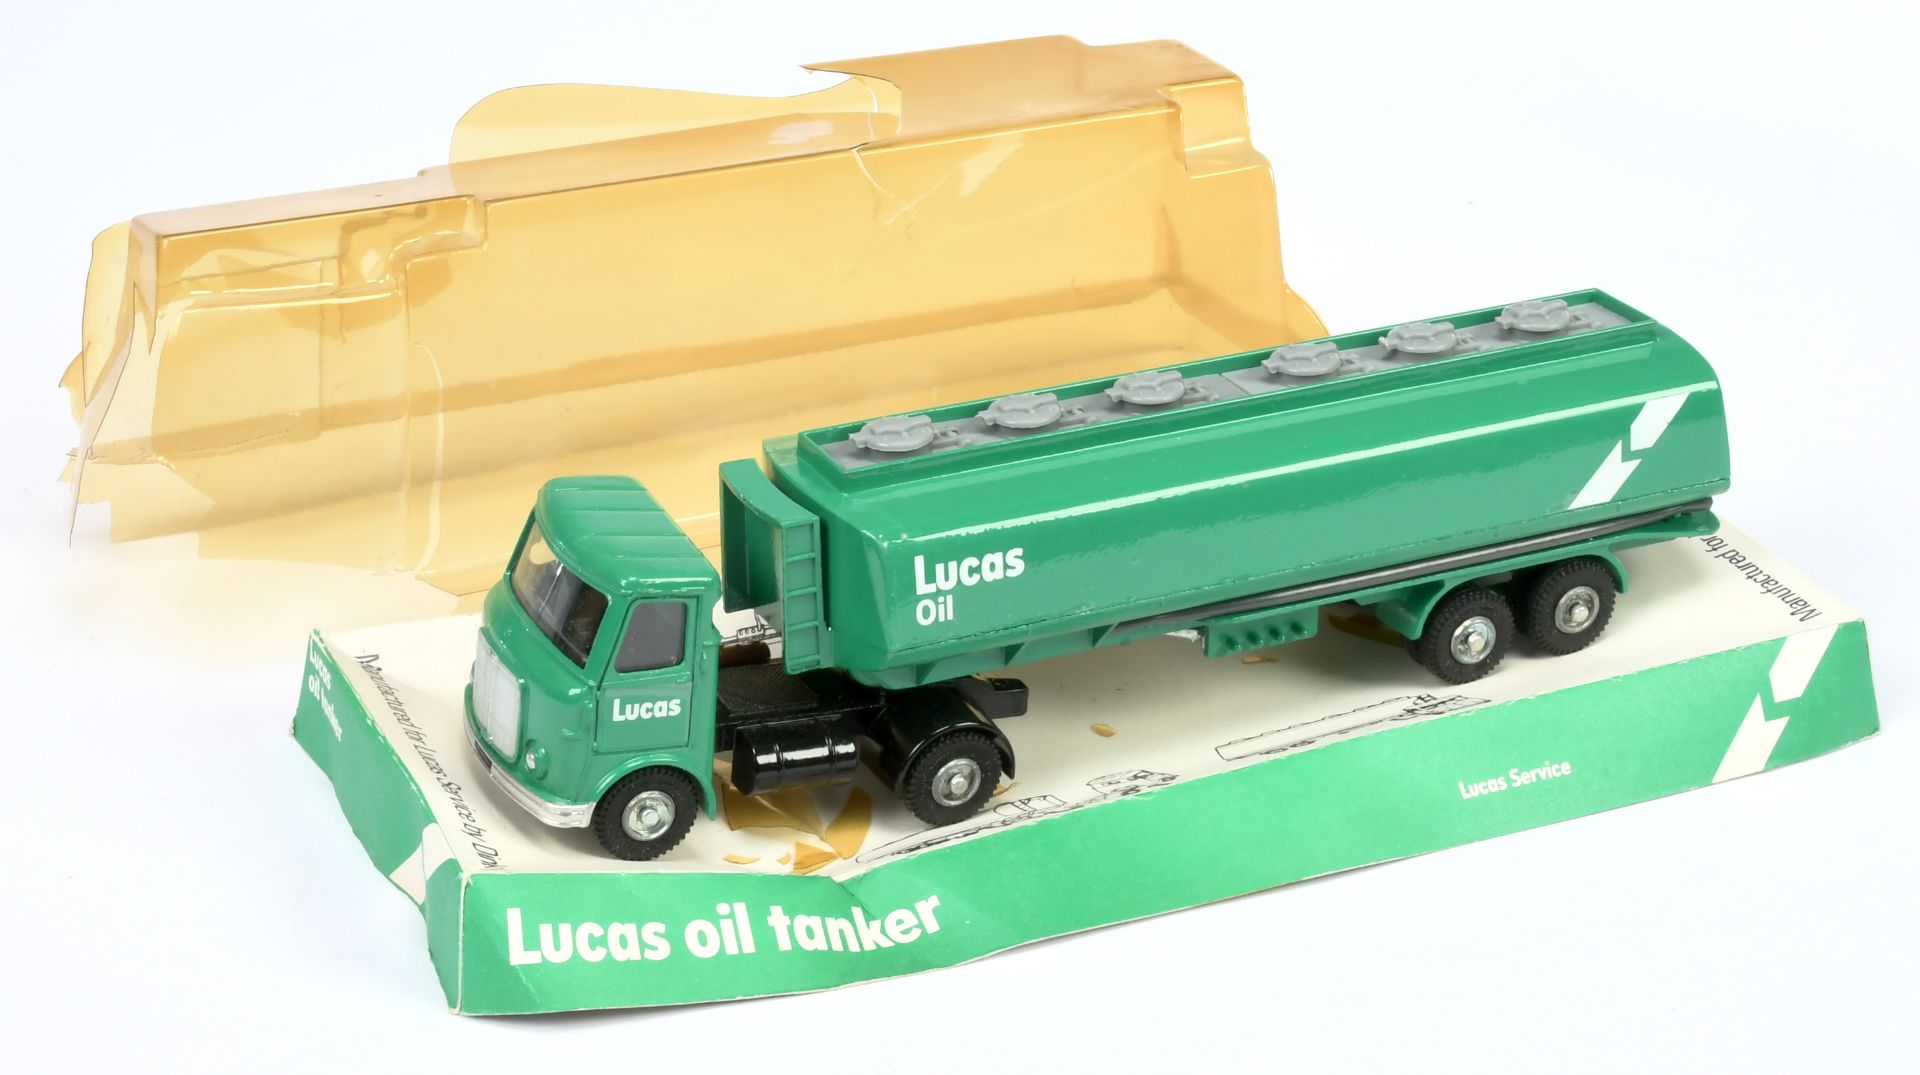 Dinky Toys 945 AEC Articulated Tanker "Lucas Oil" - Green cab and tanker, black chassis and inter...